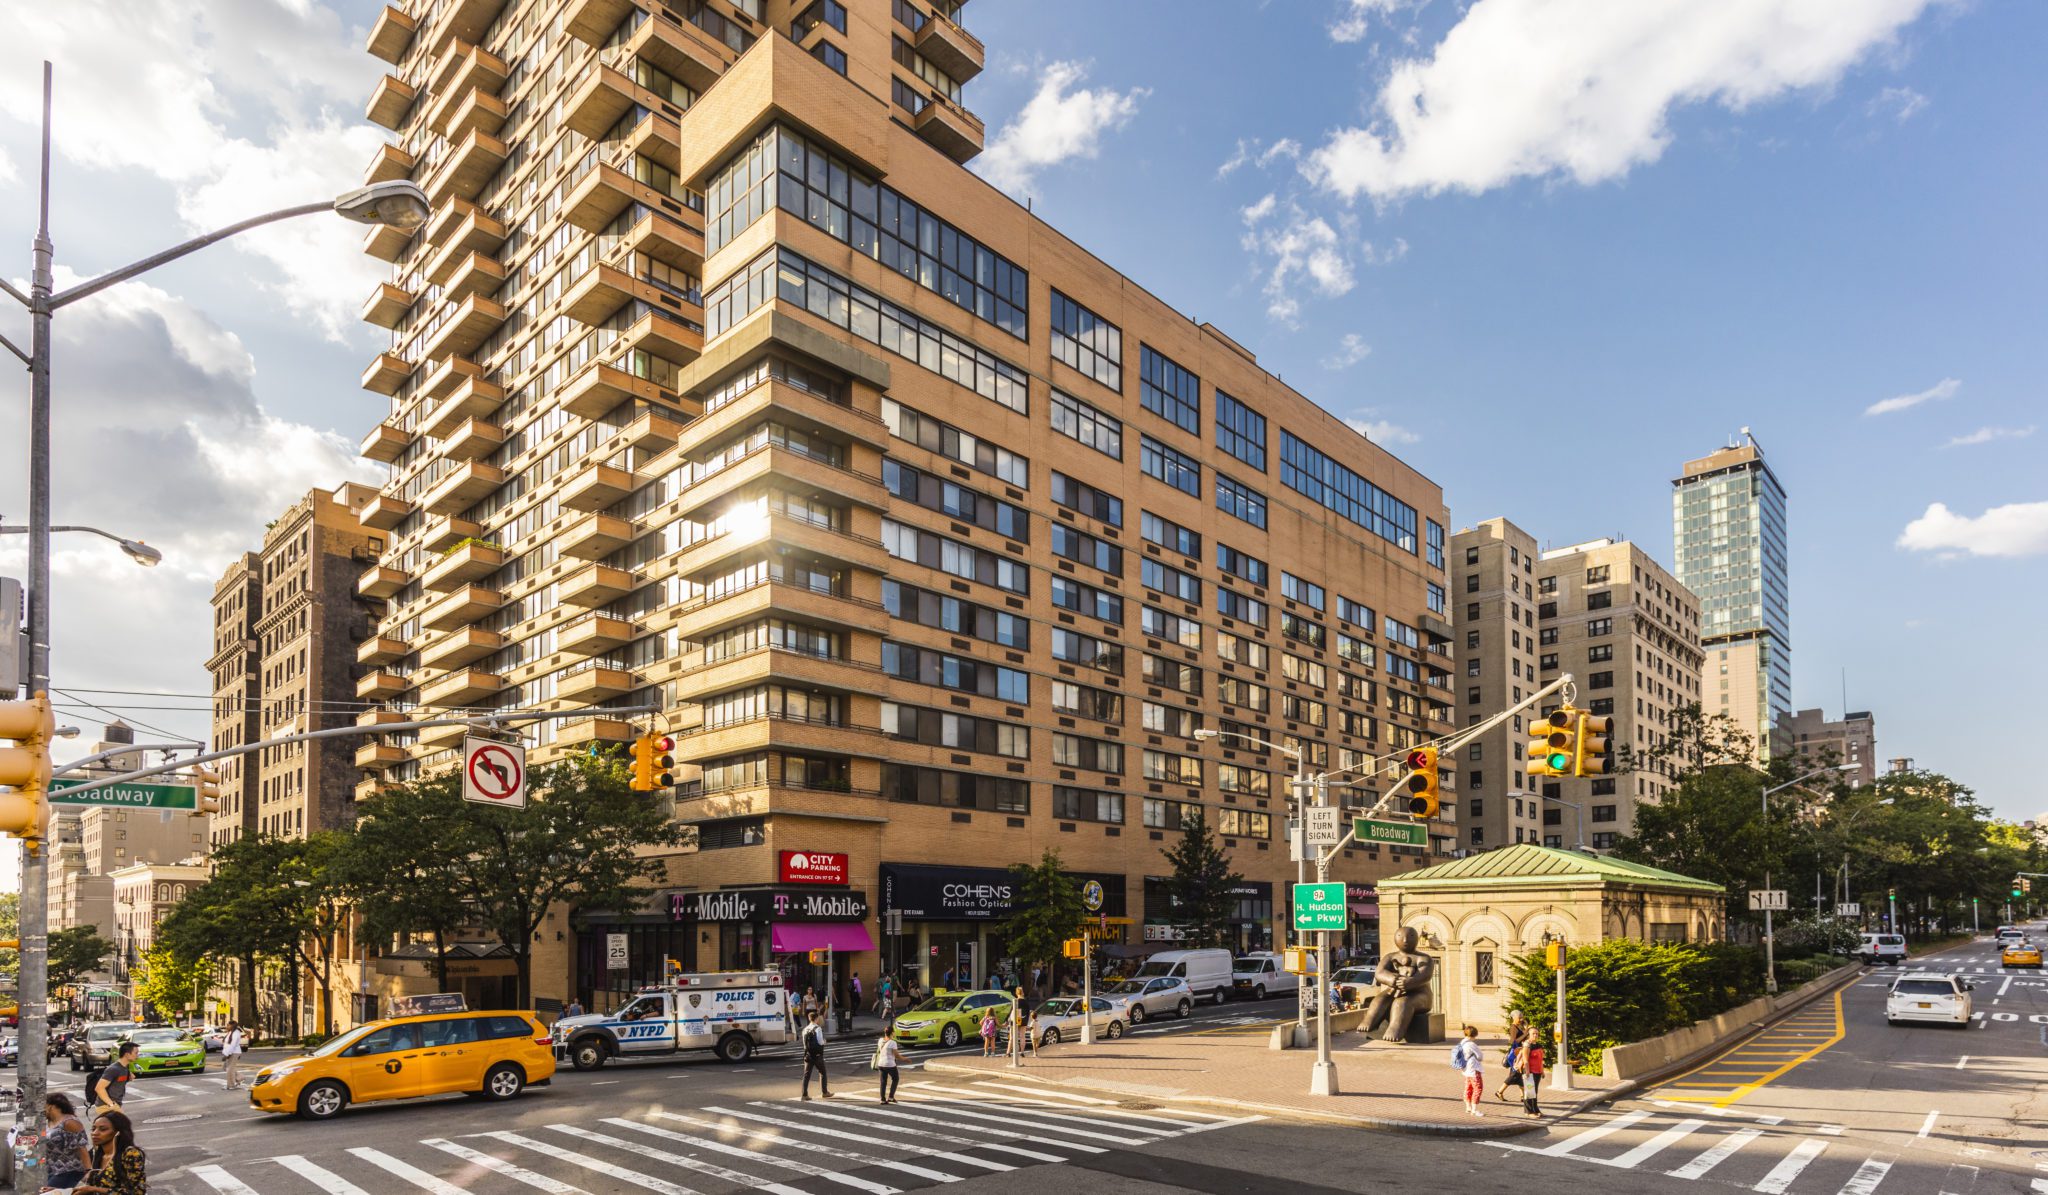 WHY YOU SHOULD CHOOSE THE UPPER WEST SIDE